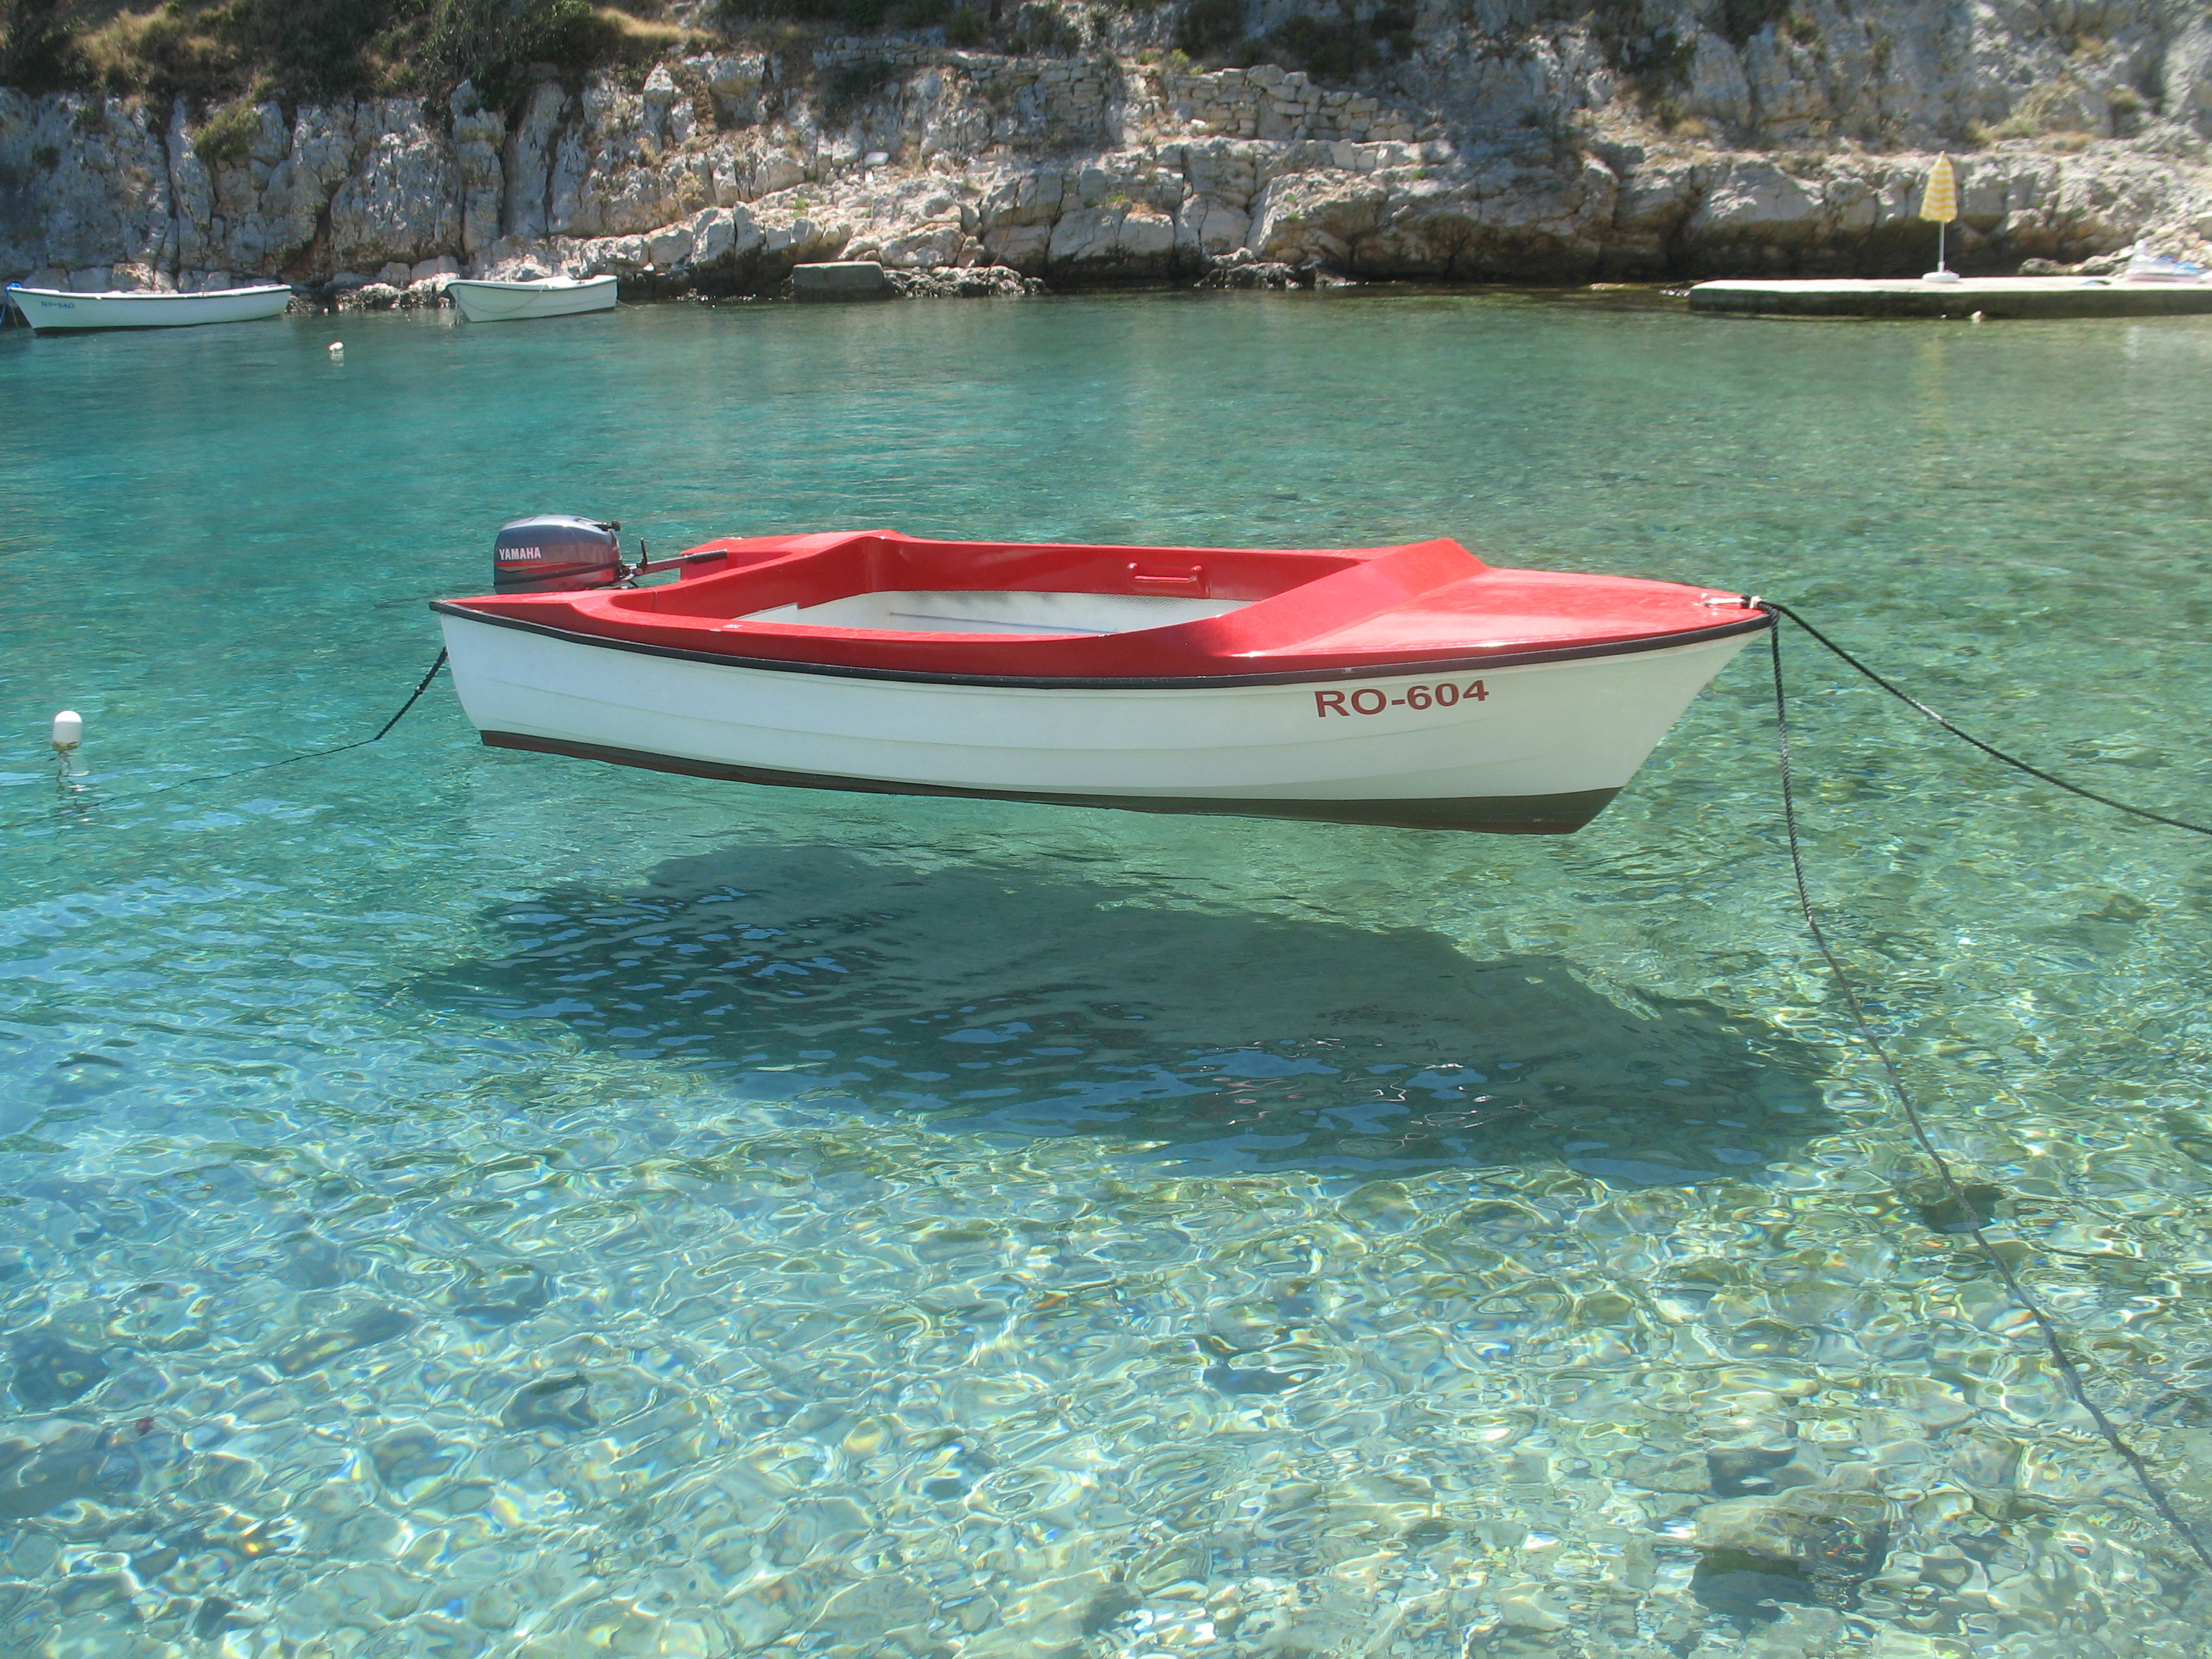 File:Boat on clear water at island Šolta.jpg - Wikimedia Commons